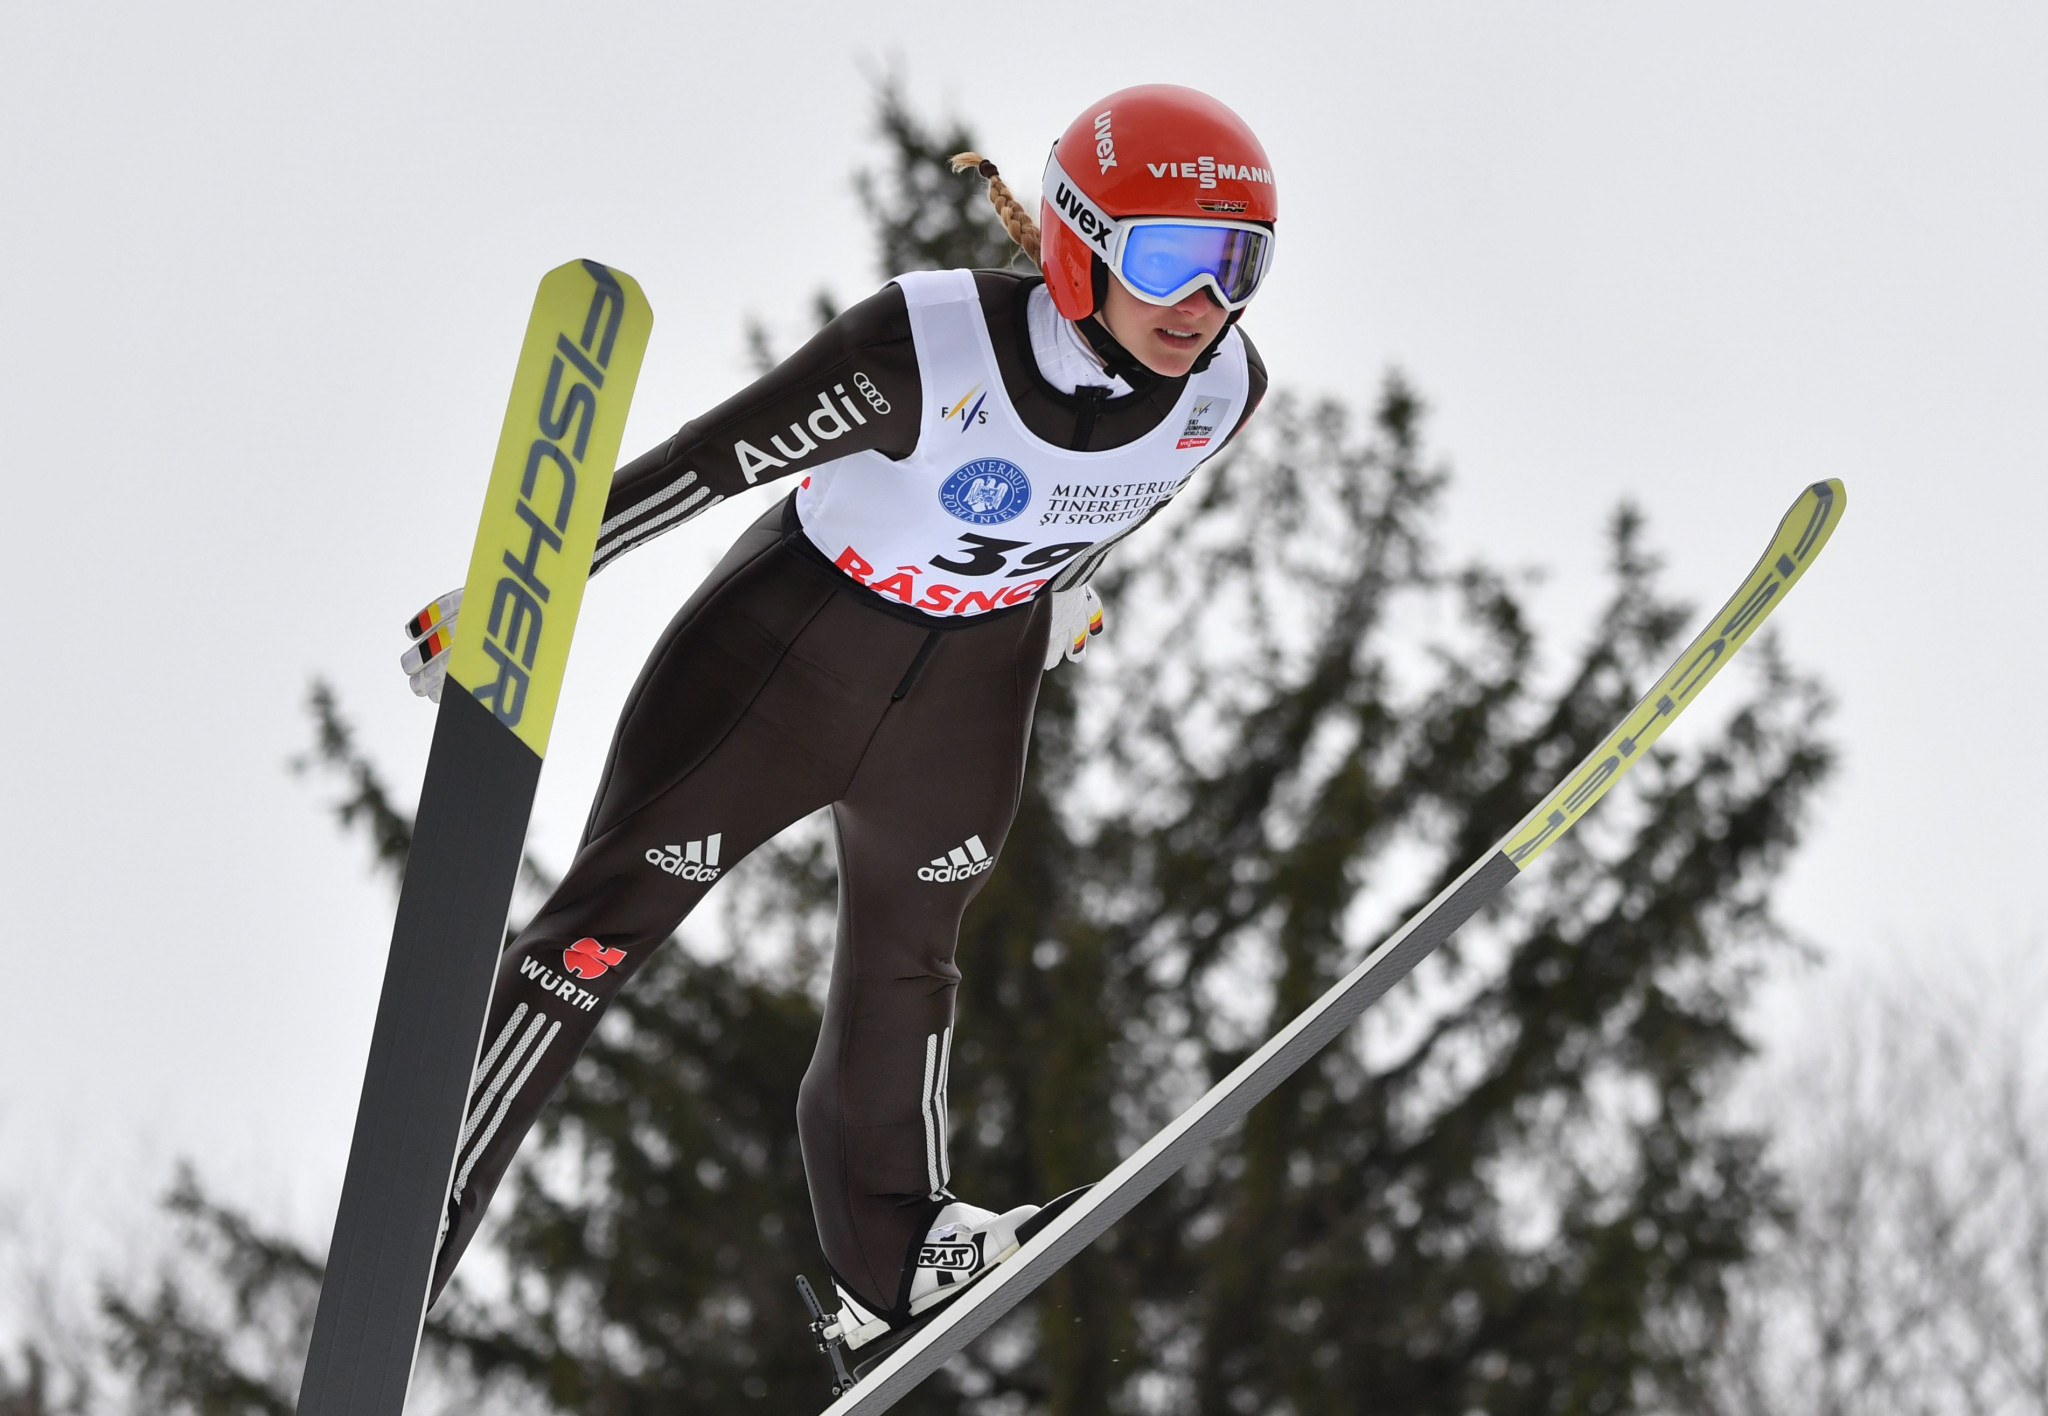 Althaus beats Olympic champion to clinch third win of season at FIS Ski Jumping World Cup